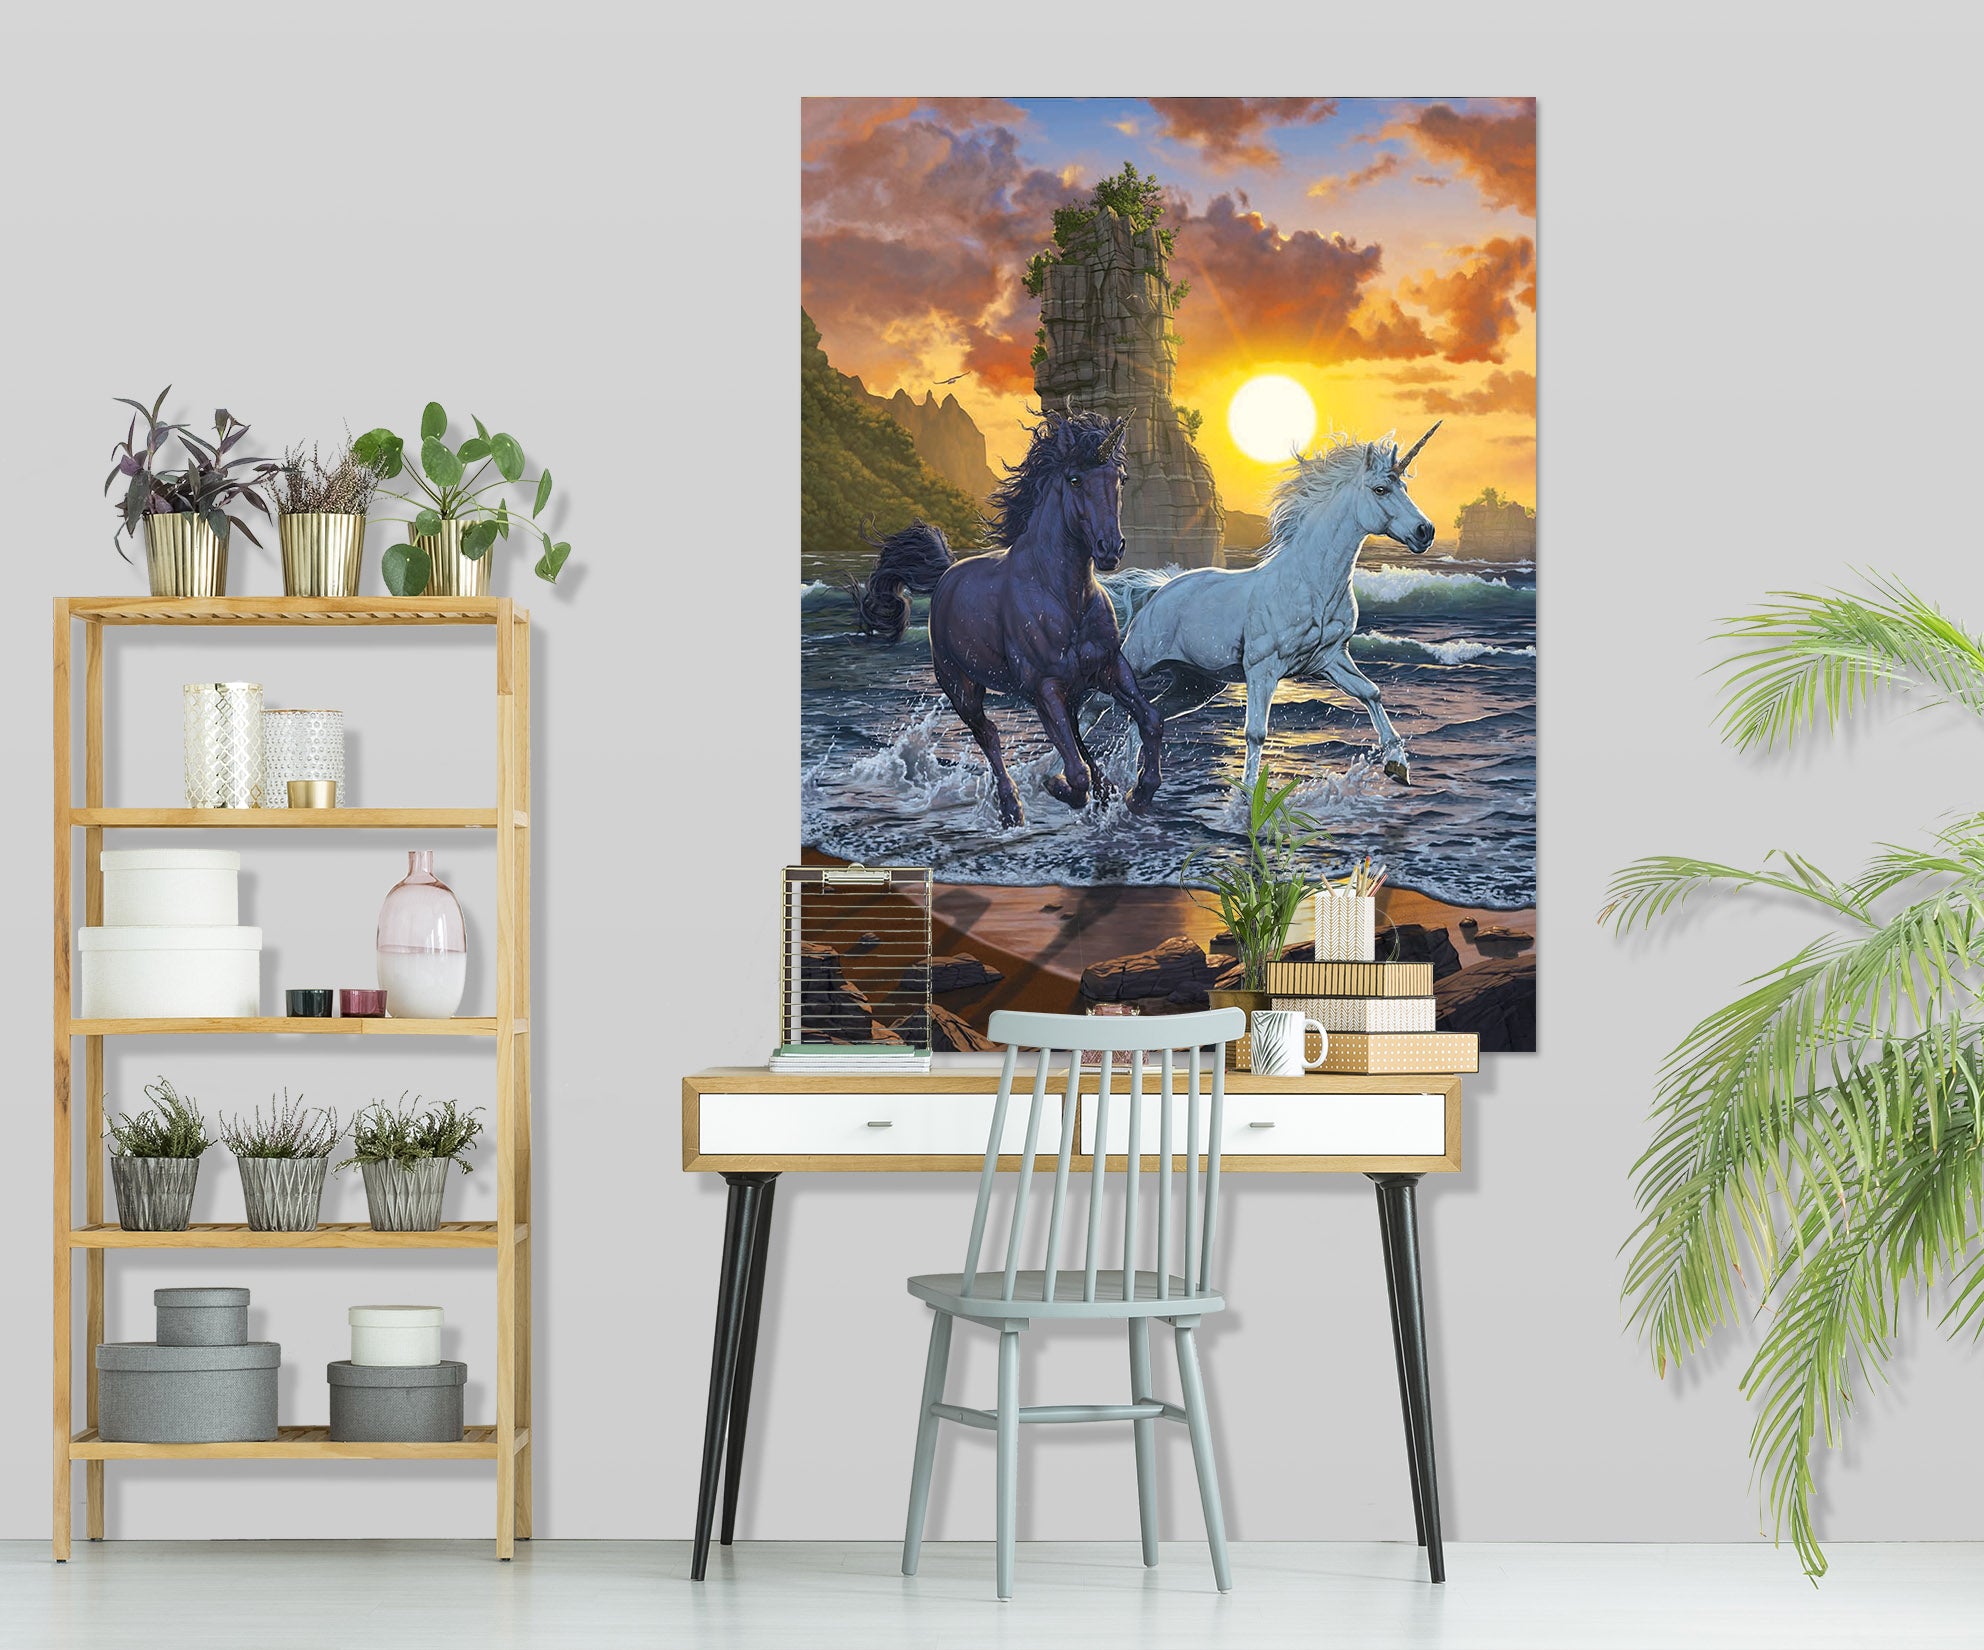 3D Unicorns In Sunset 088 Vincent Hie Wall Sticker